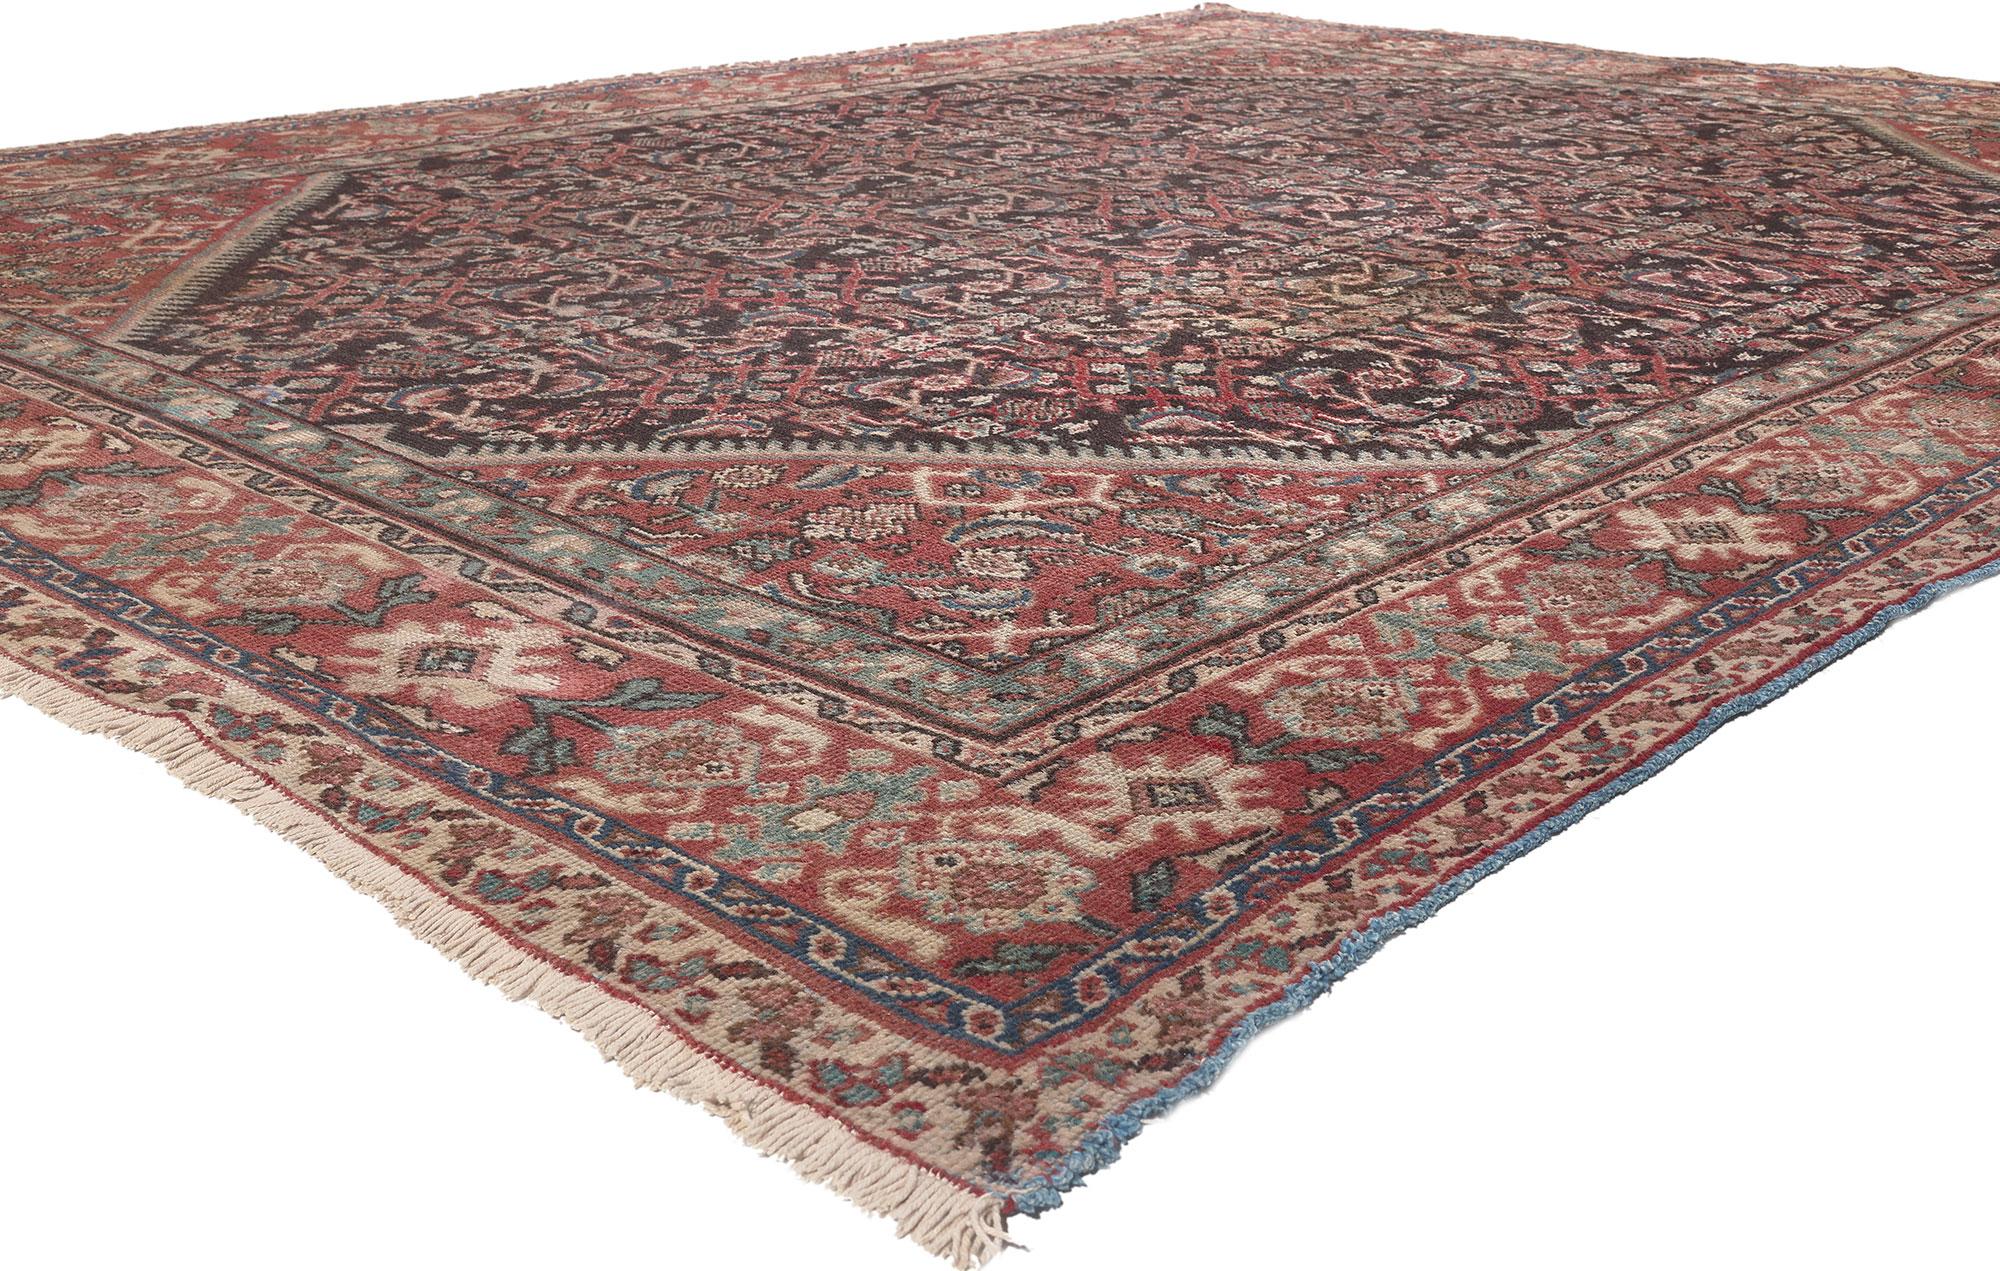 74576, Distressed Antique Persian Mahal Area Rug with Modern Rustic English Style 09'01 x 12'00.  With a timeless design and nostalgic charm, this hand knotted wool distressed antique Persian Mahal rug can beautifully blend modern, contemporary and